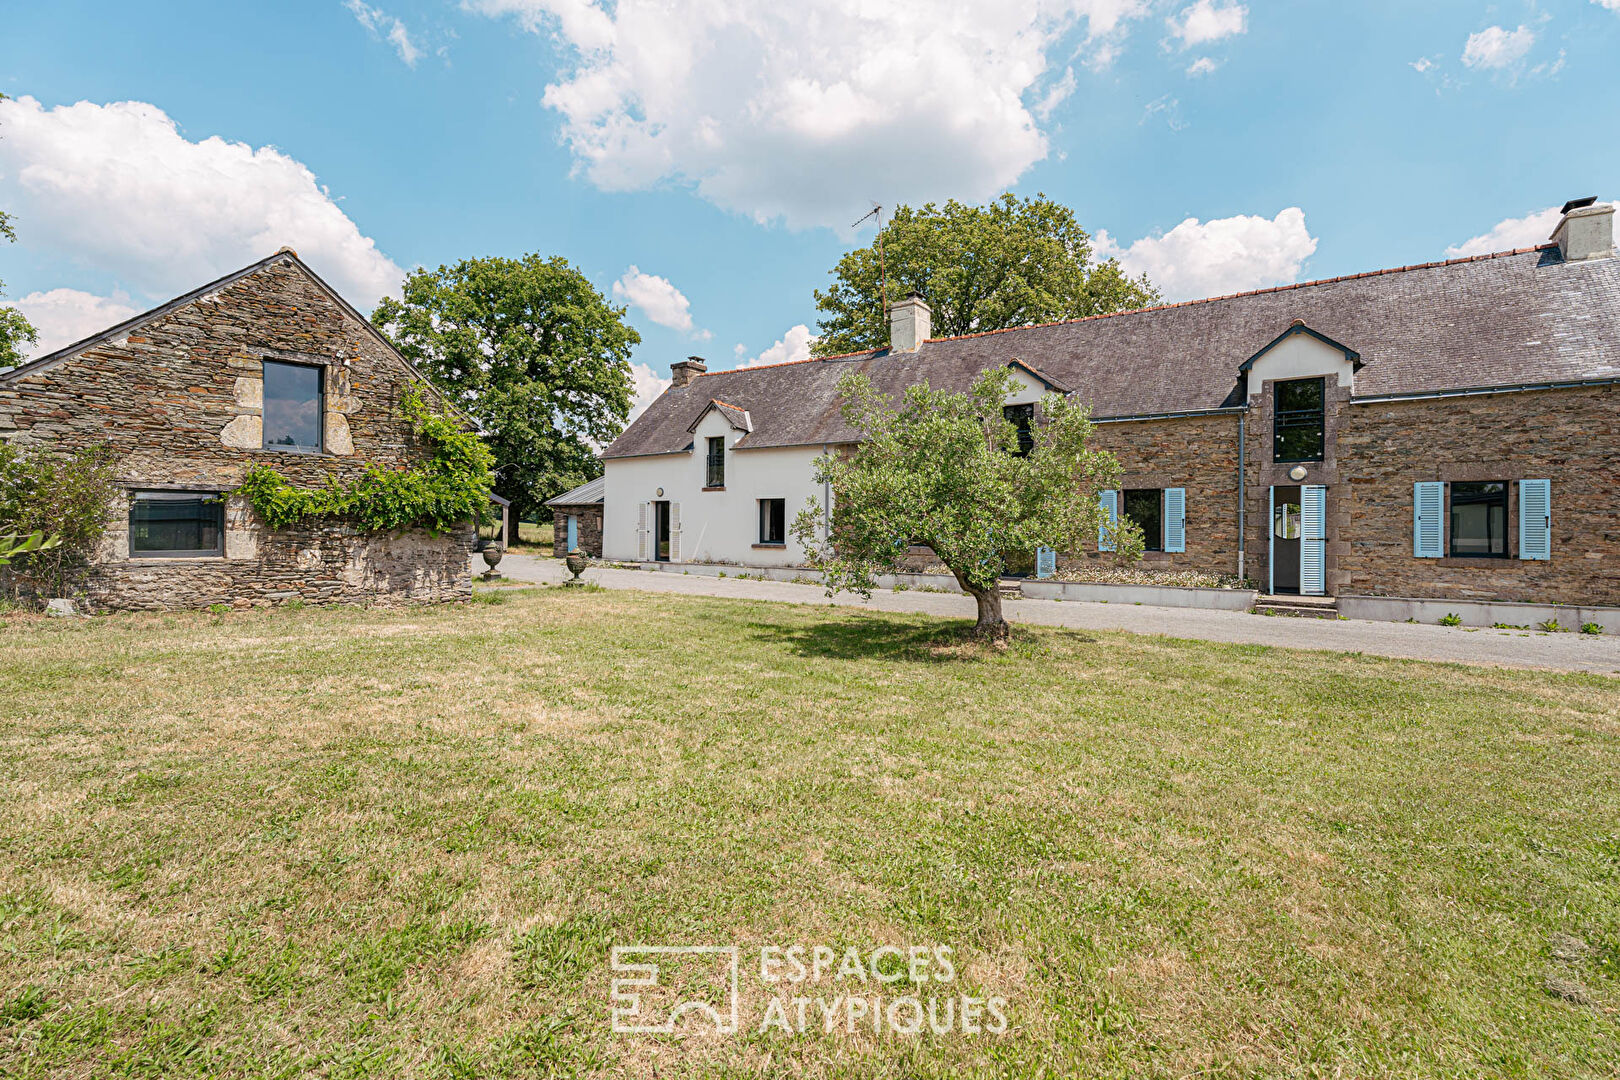 Estate with gites in the Brocéliande region on 6 hectares